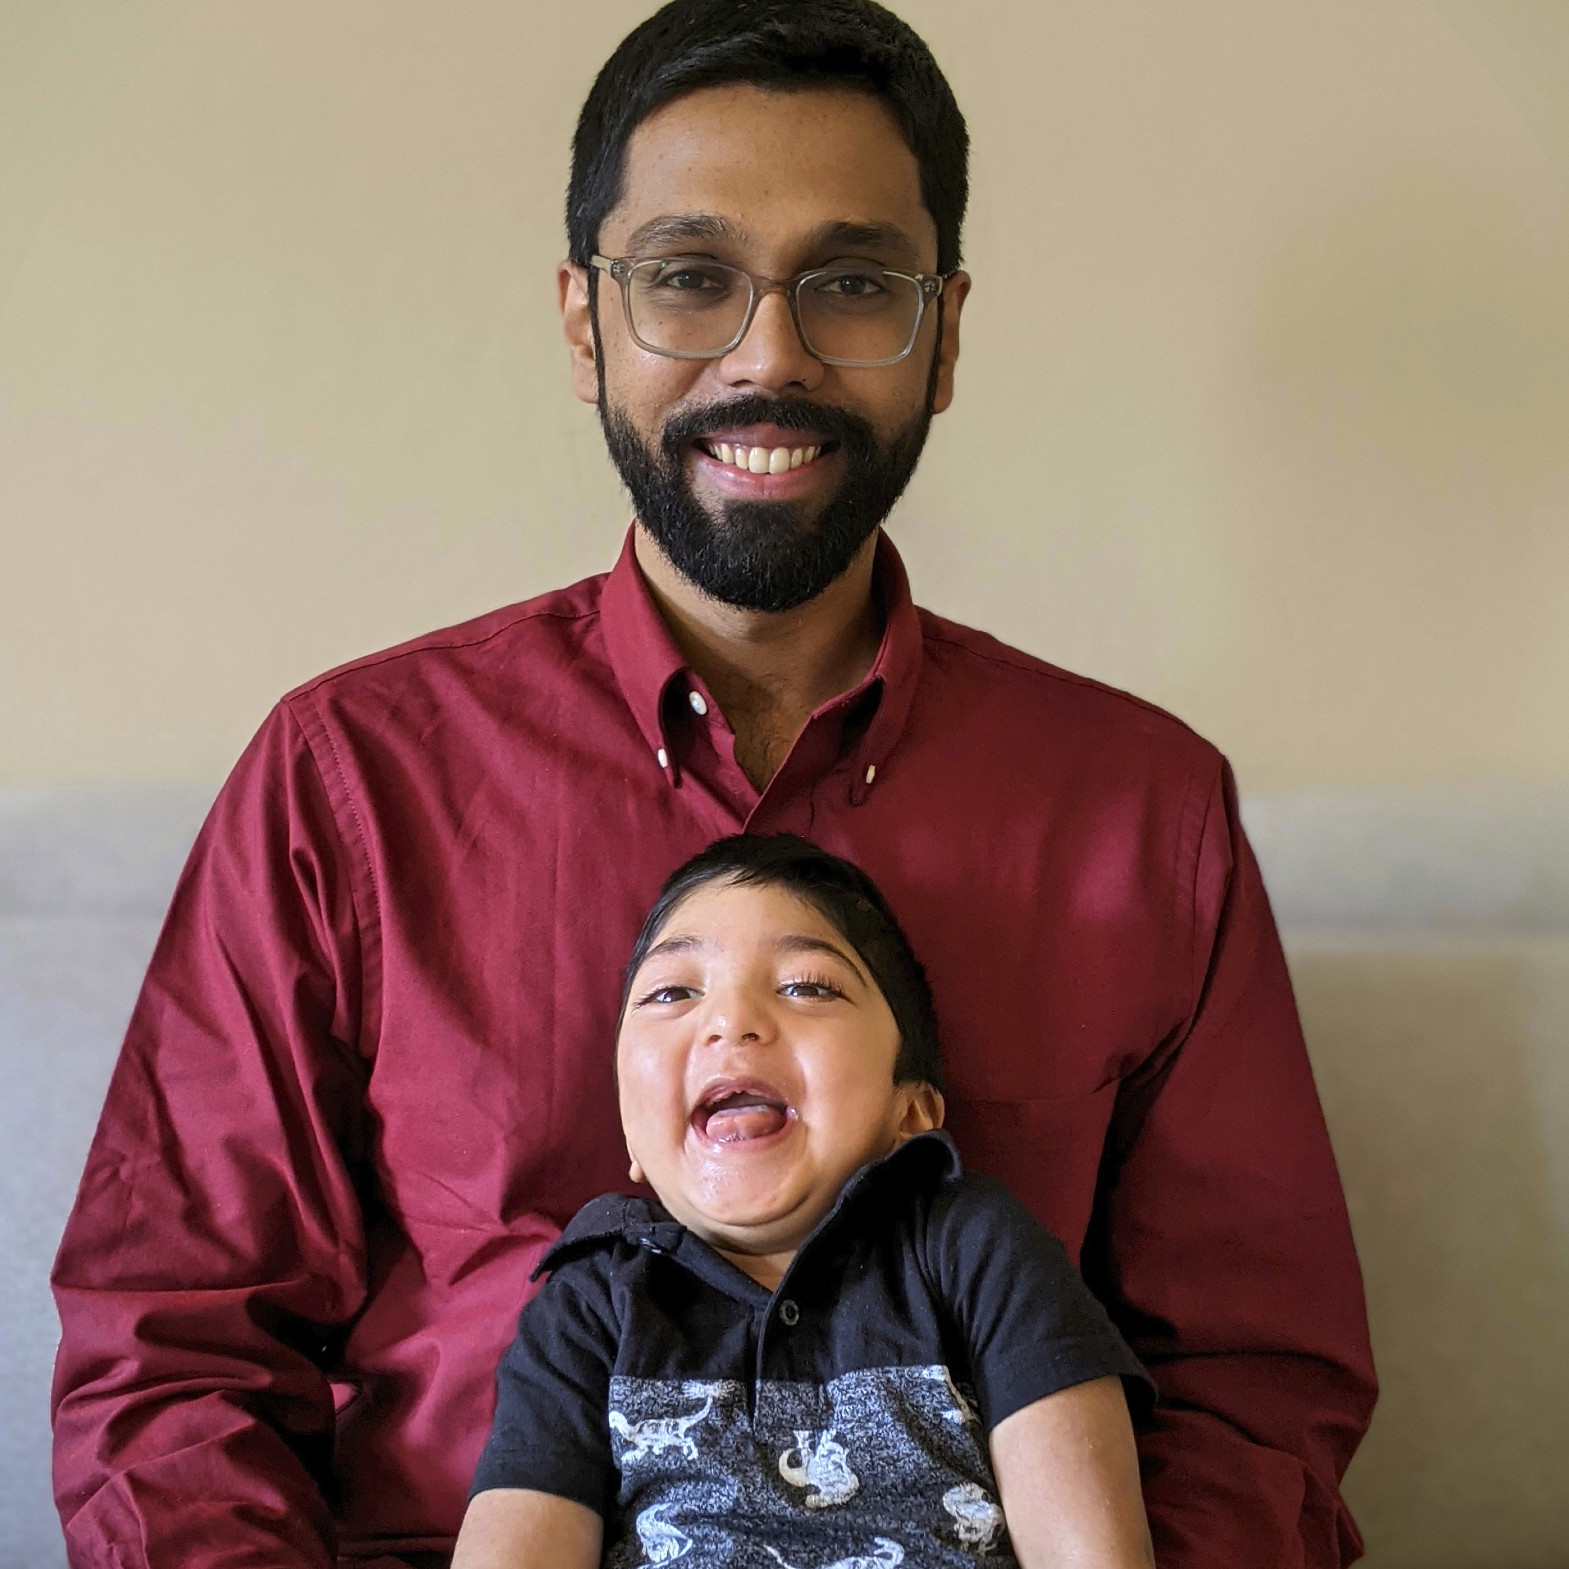 Tech-savvy dad launches open-source platform to save children with rare diseases – including his son